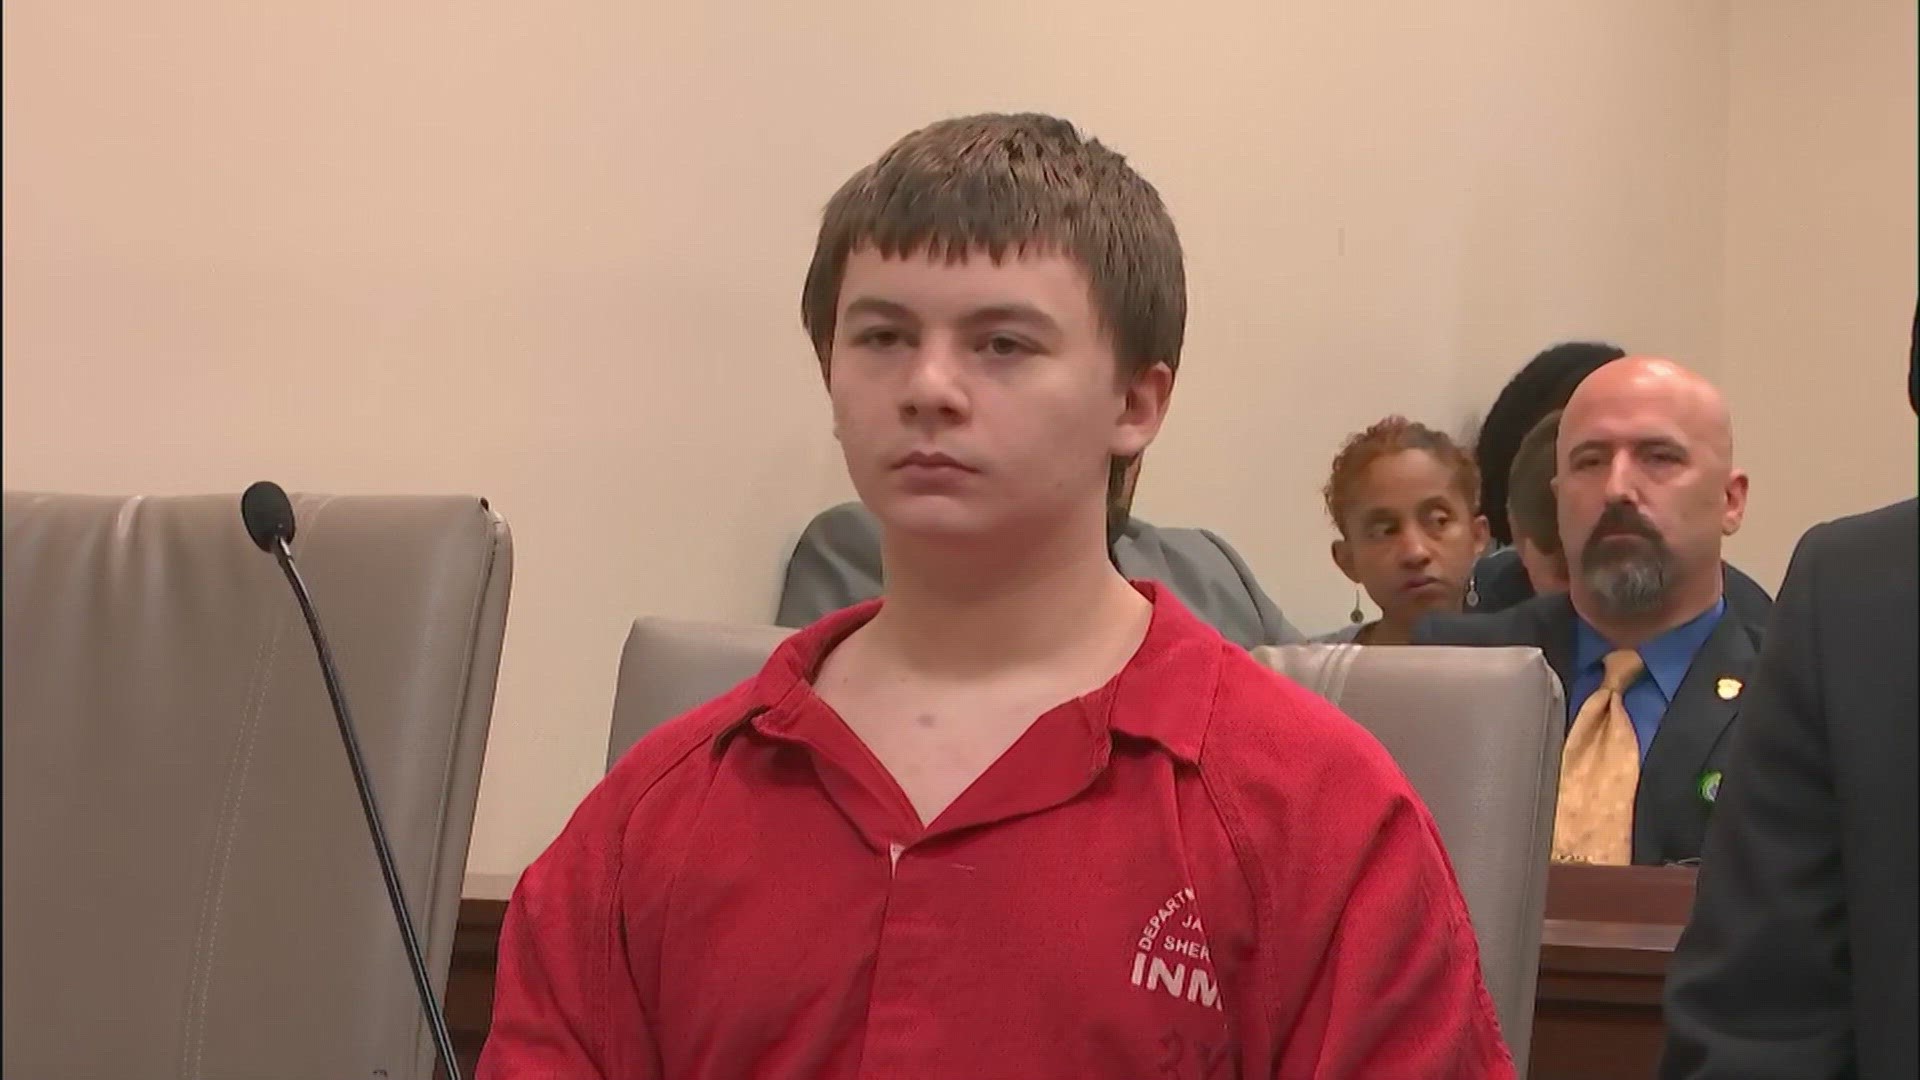 Aiden Fucci learned he will spend the rest of life in prison for the stabbing death of Tristyn Bailey.